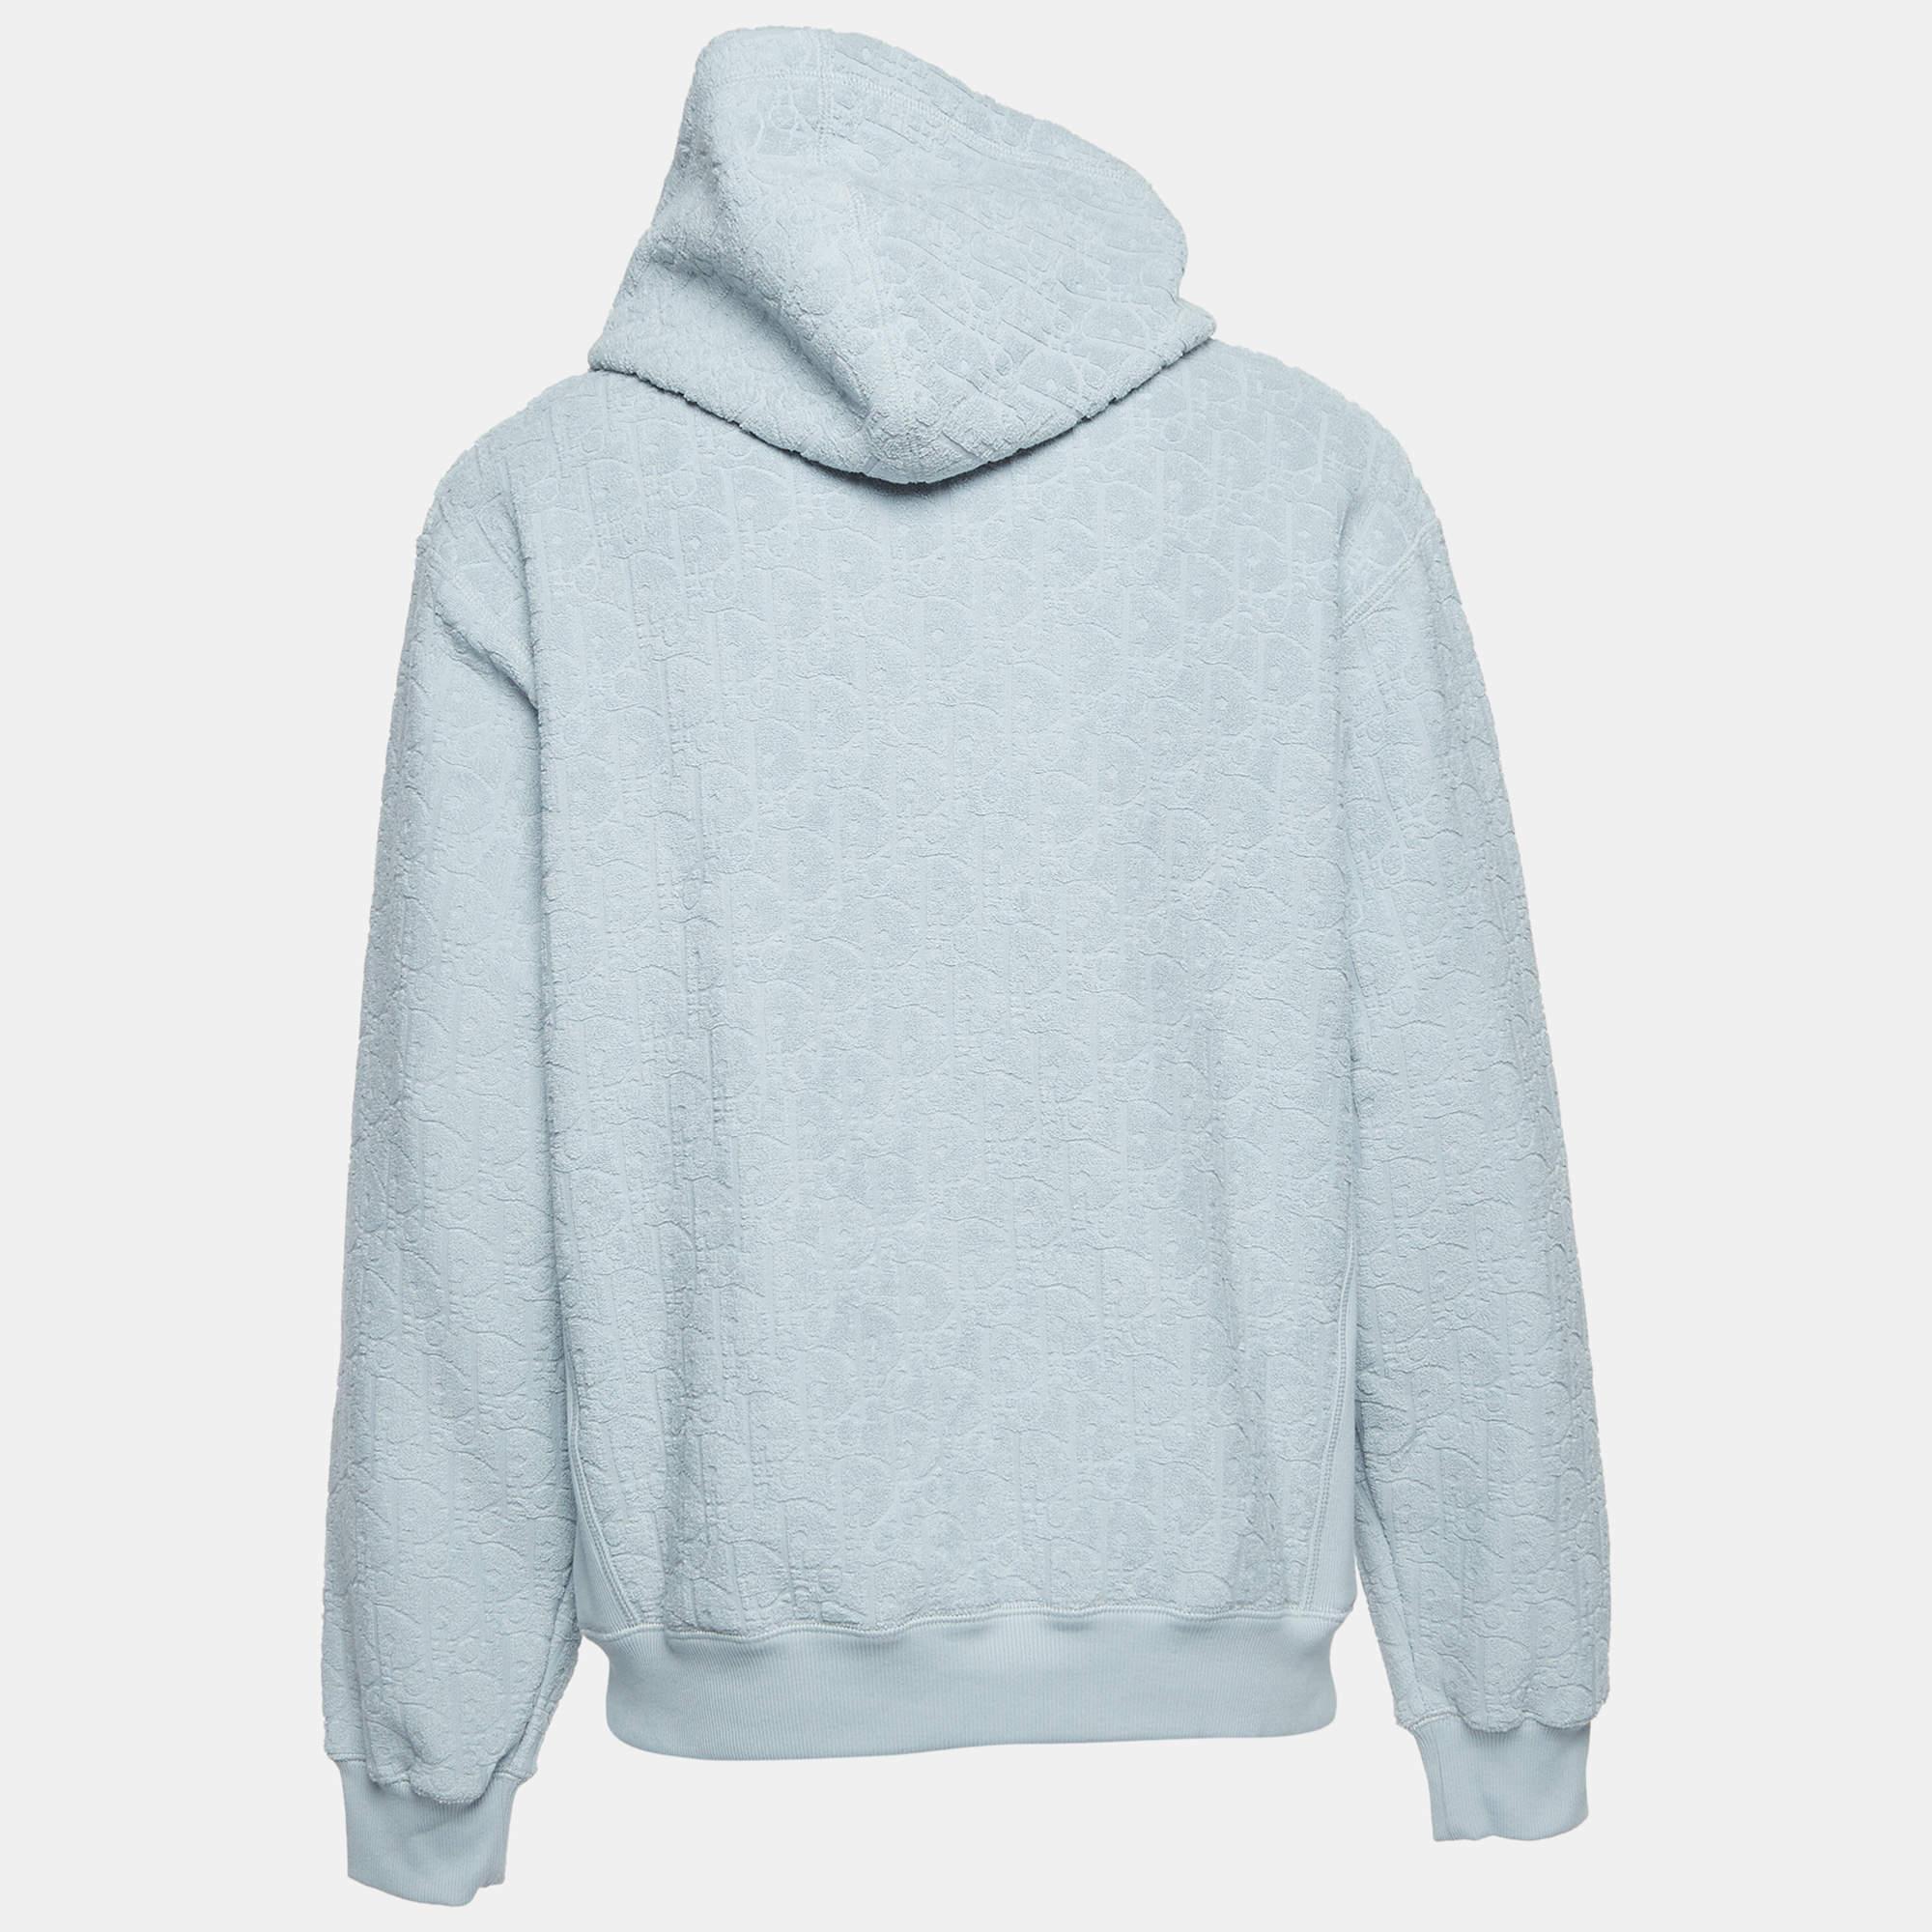 The Dior Homme hoodie is a stylish and comfortable garment featuring a versatile hue. Tailored from soft cotton, it showcases the iconic Oblique motif all over, blending luxury fashion with casual streetwear for a distinctive and contemporary look.

